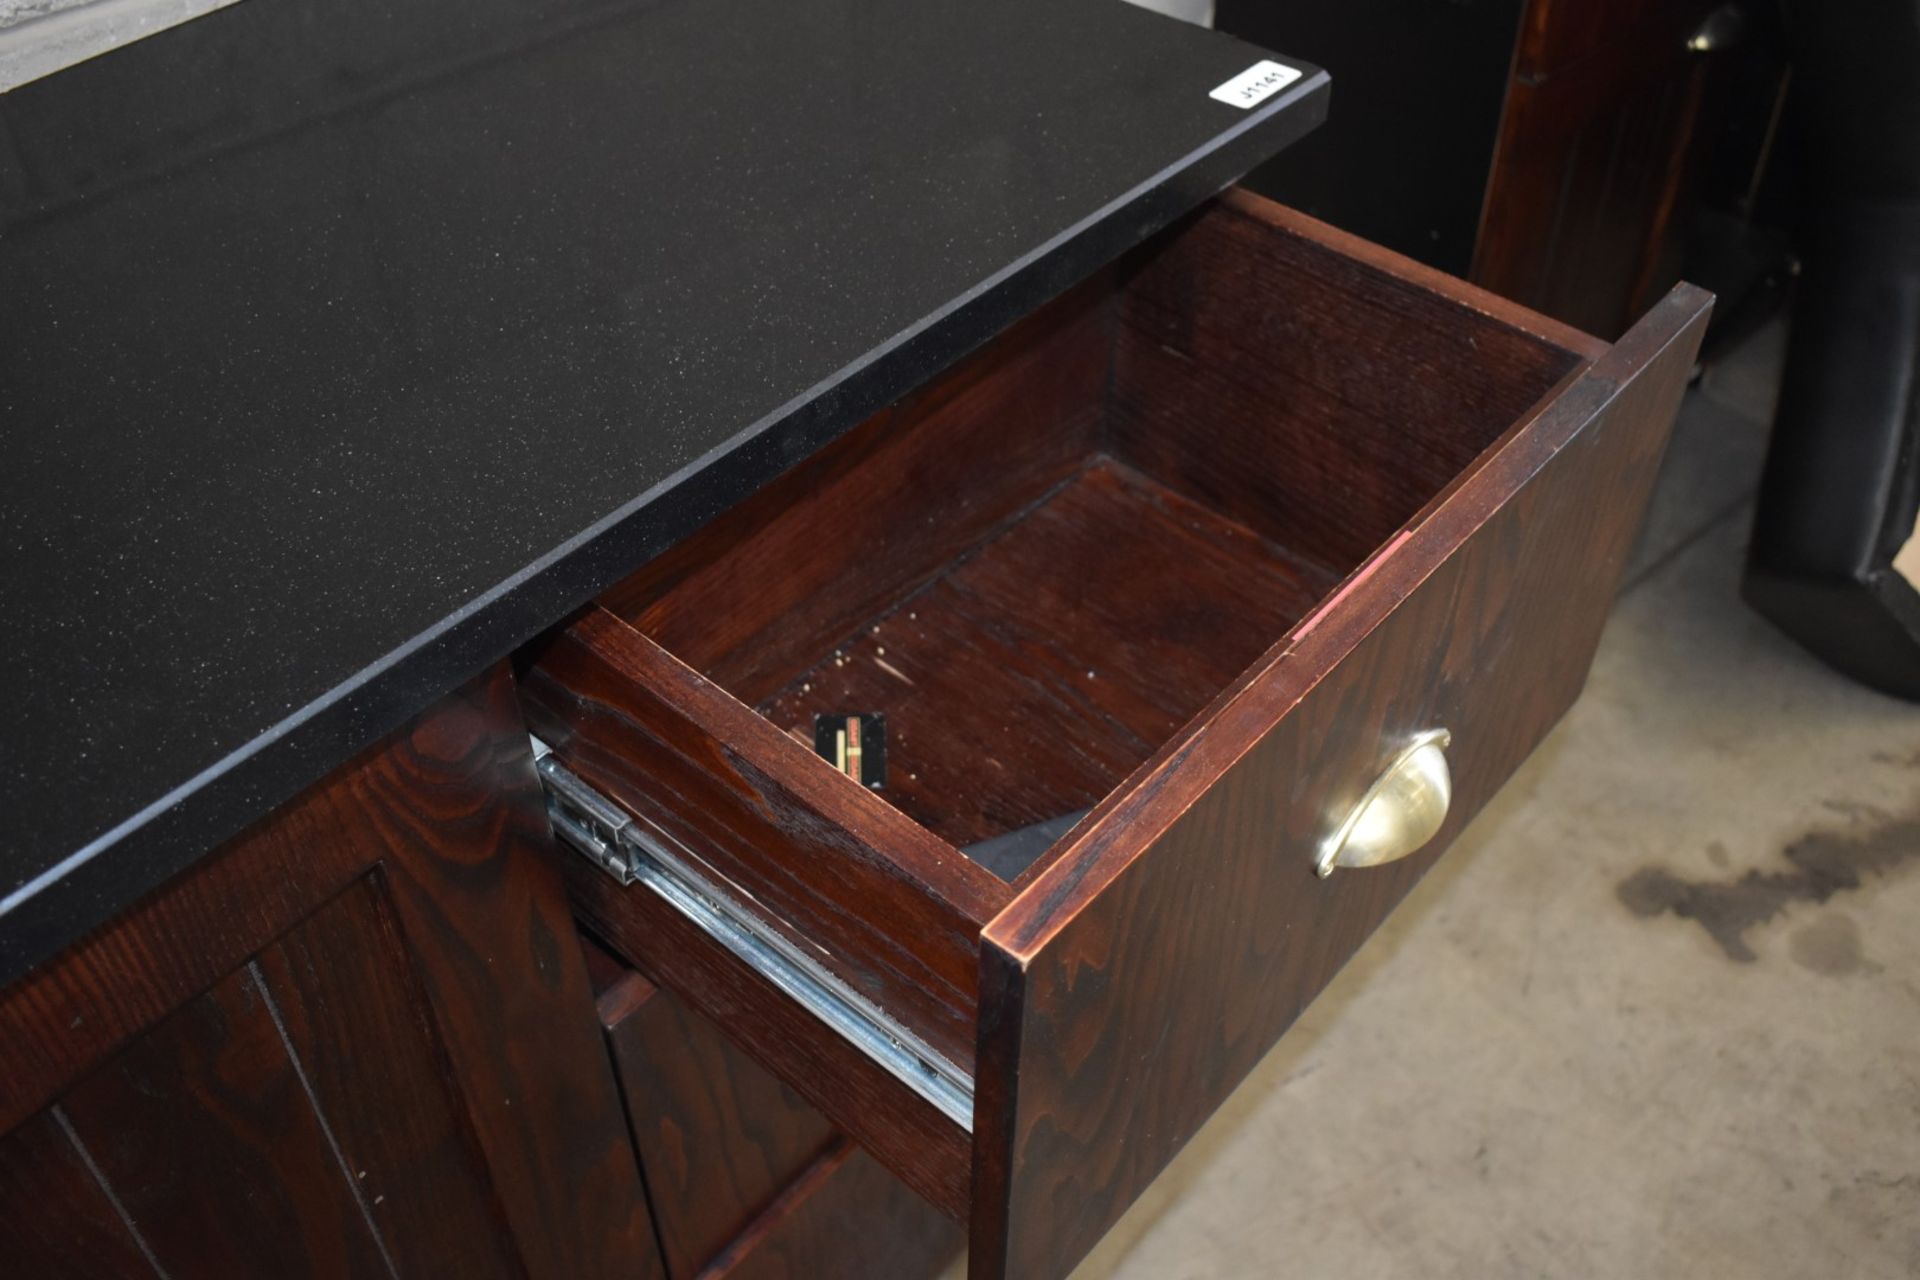 1 x Waitress Server Counter With Dark Wood Finish, Brass Hardware and Stone Top - H96 x W150 x D52 - Image 9 of 11